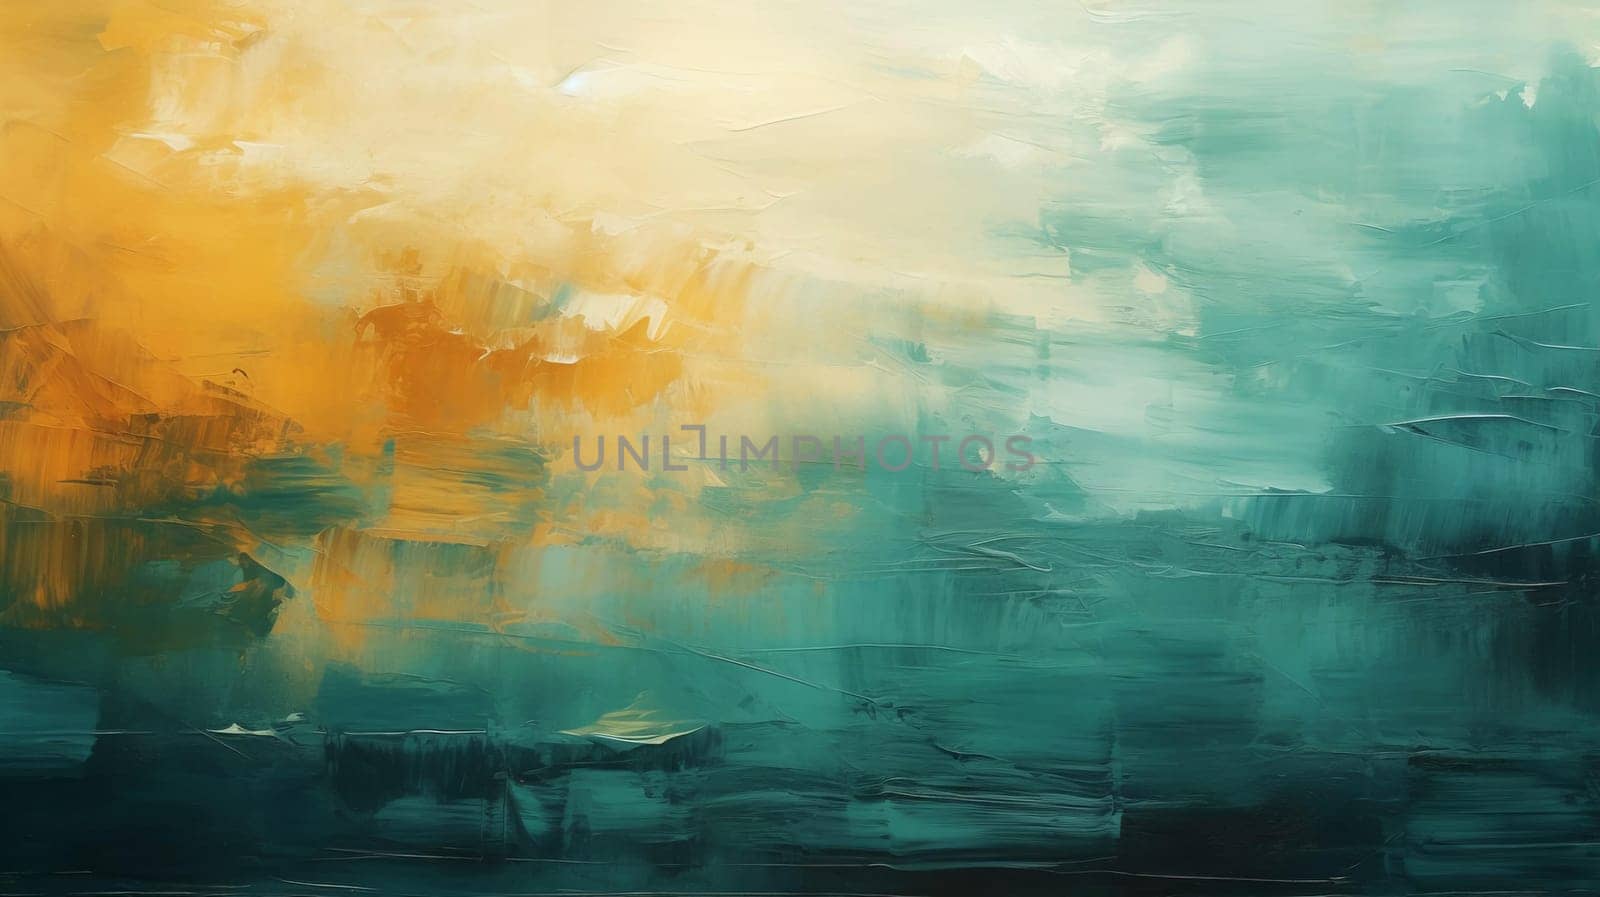 Abstract grunge-style background, hand-painted in brown, green, yellow and dark blue by Севостьянов